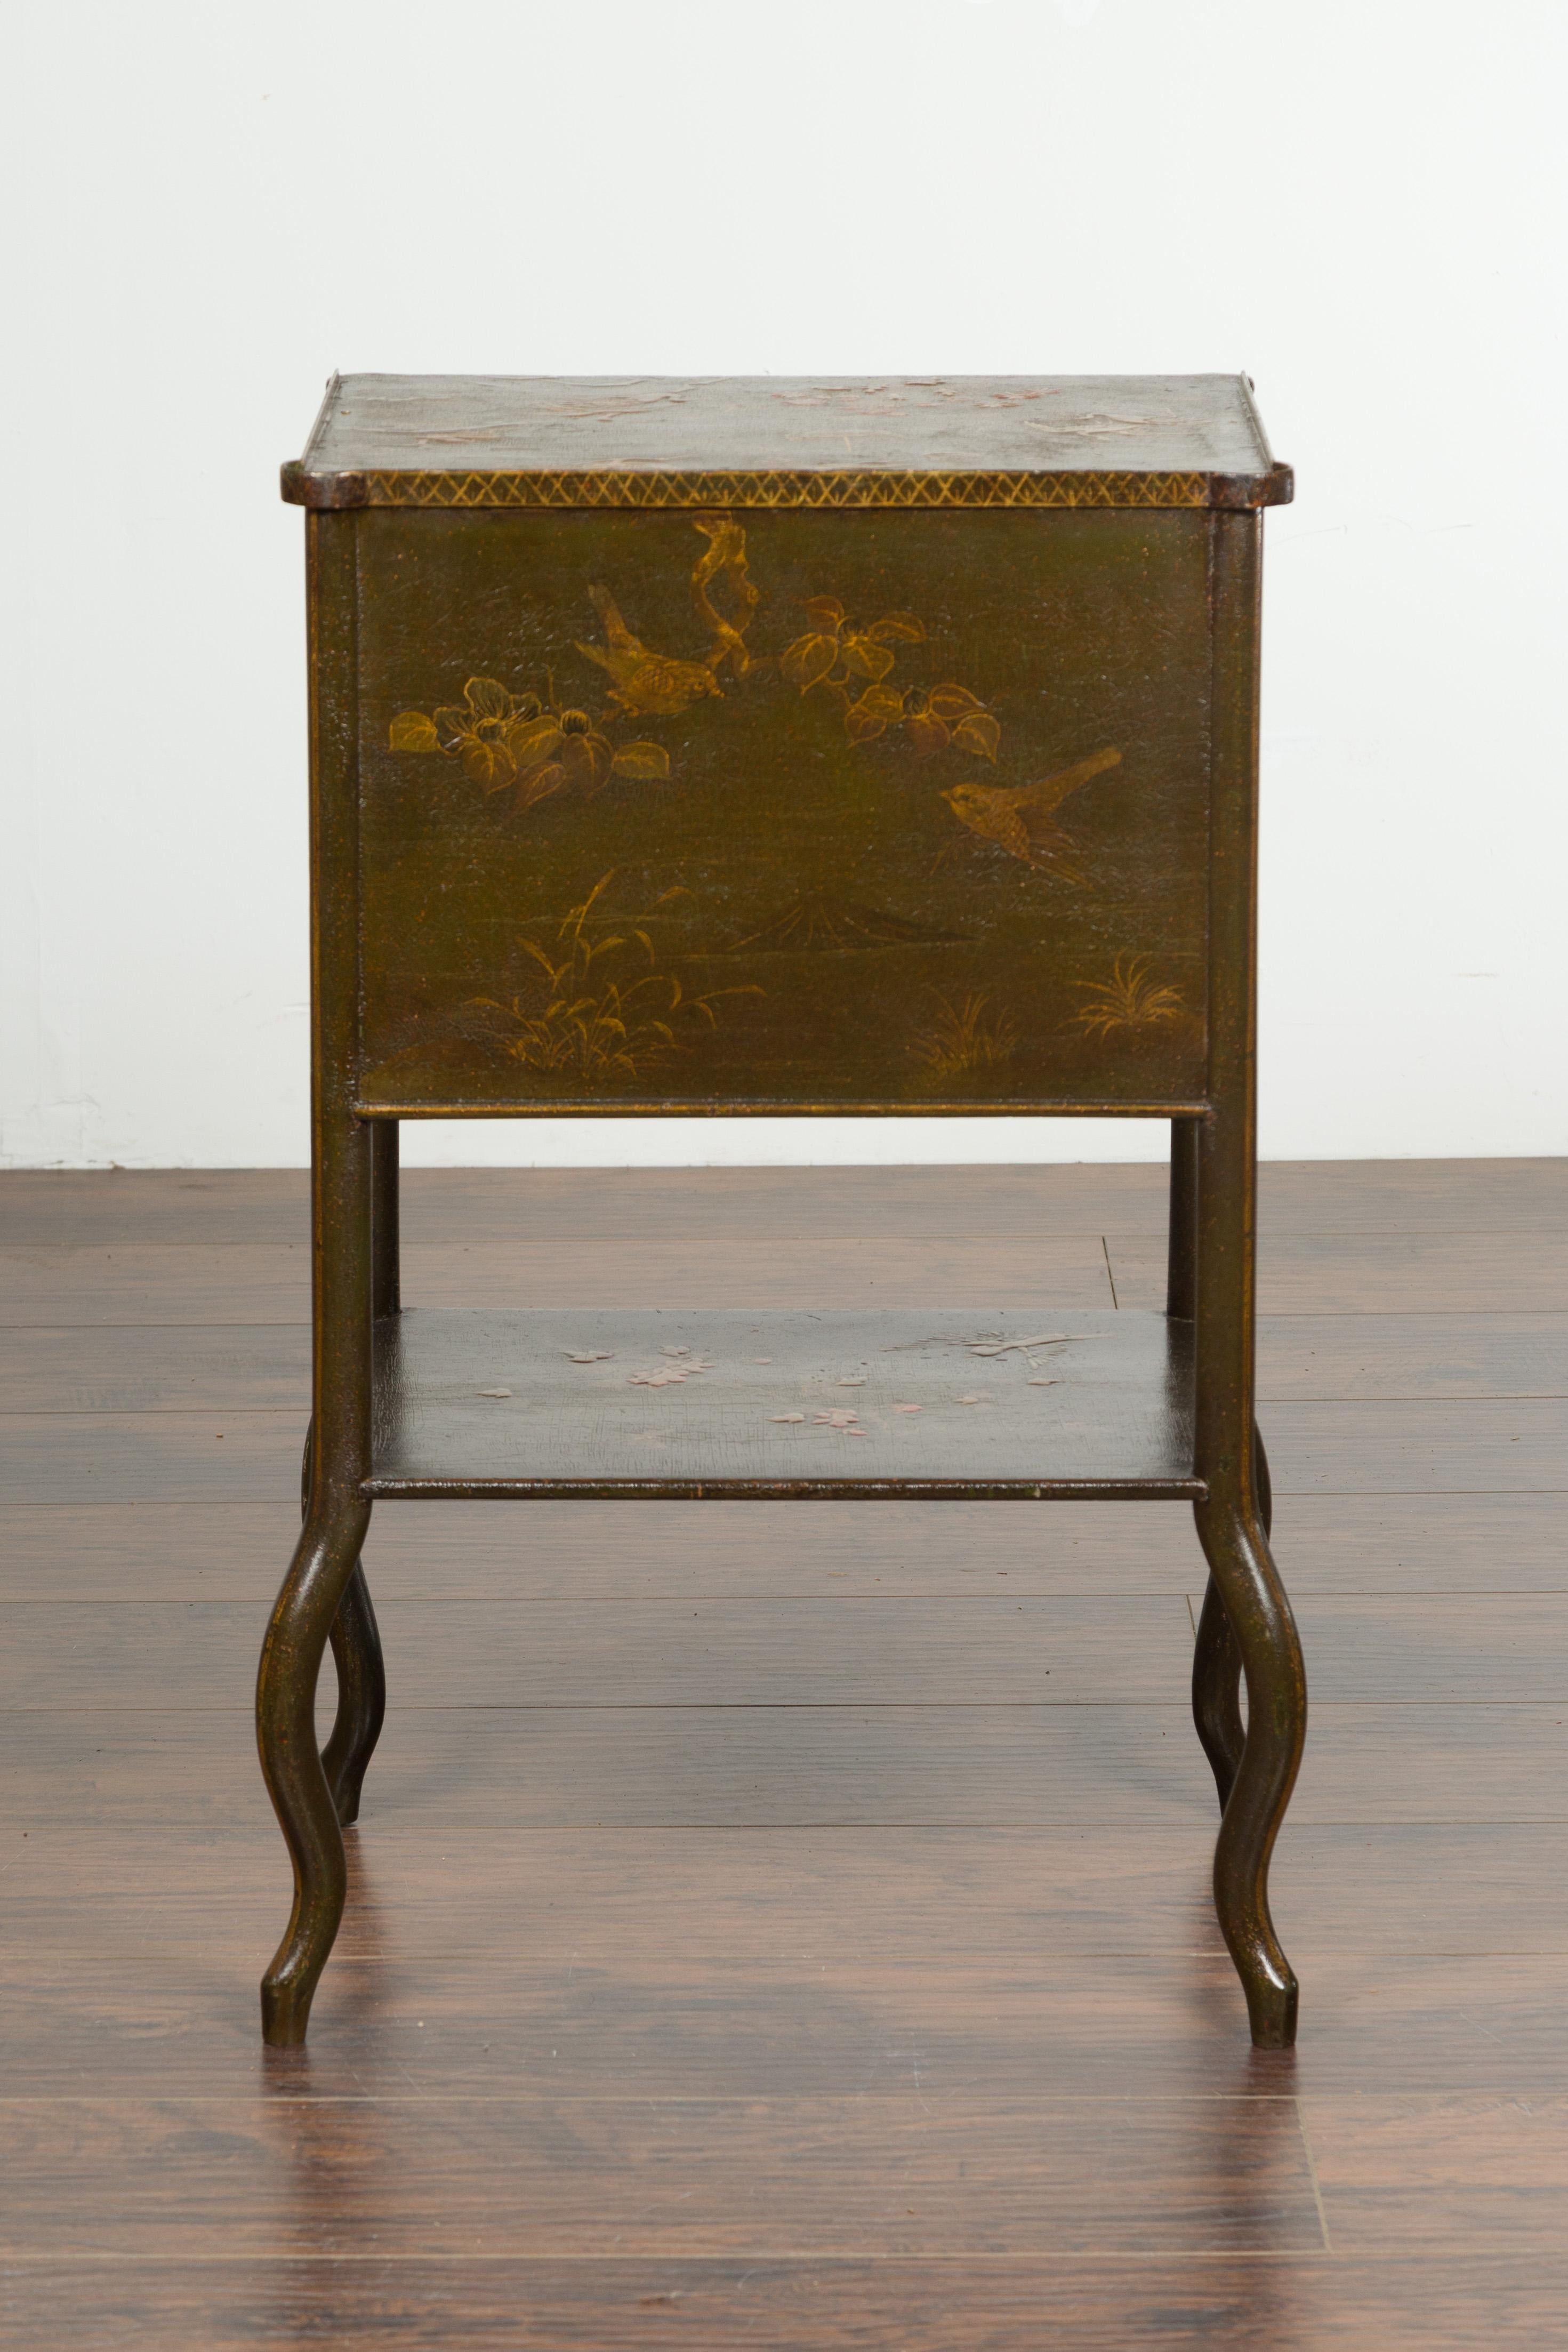 English 19th Century Chinoiserie Table with Four Drawers, Shelf and Curving Legs 12